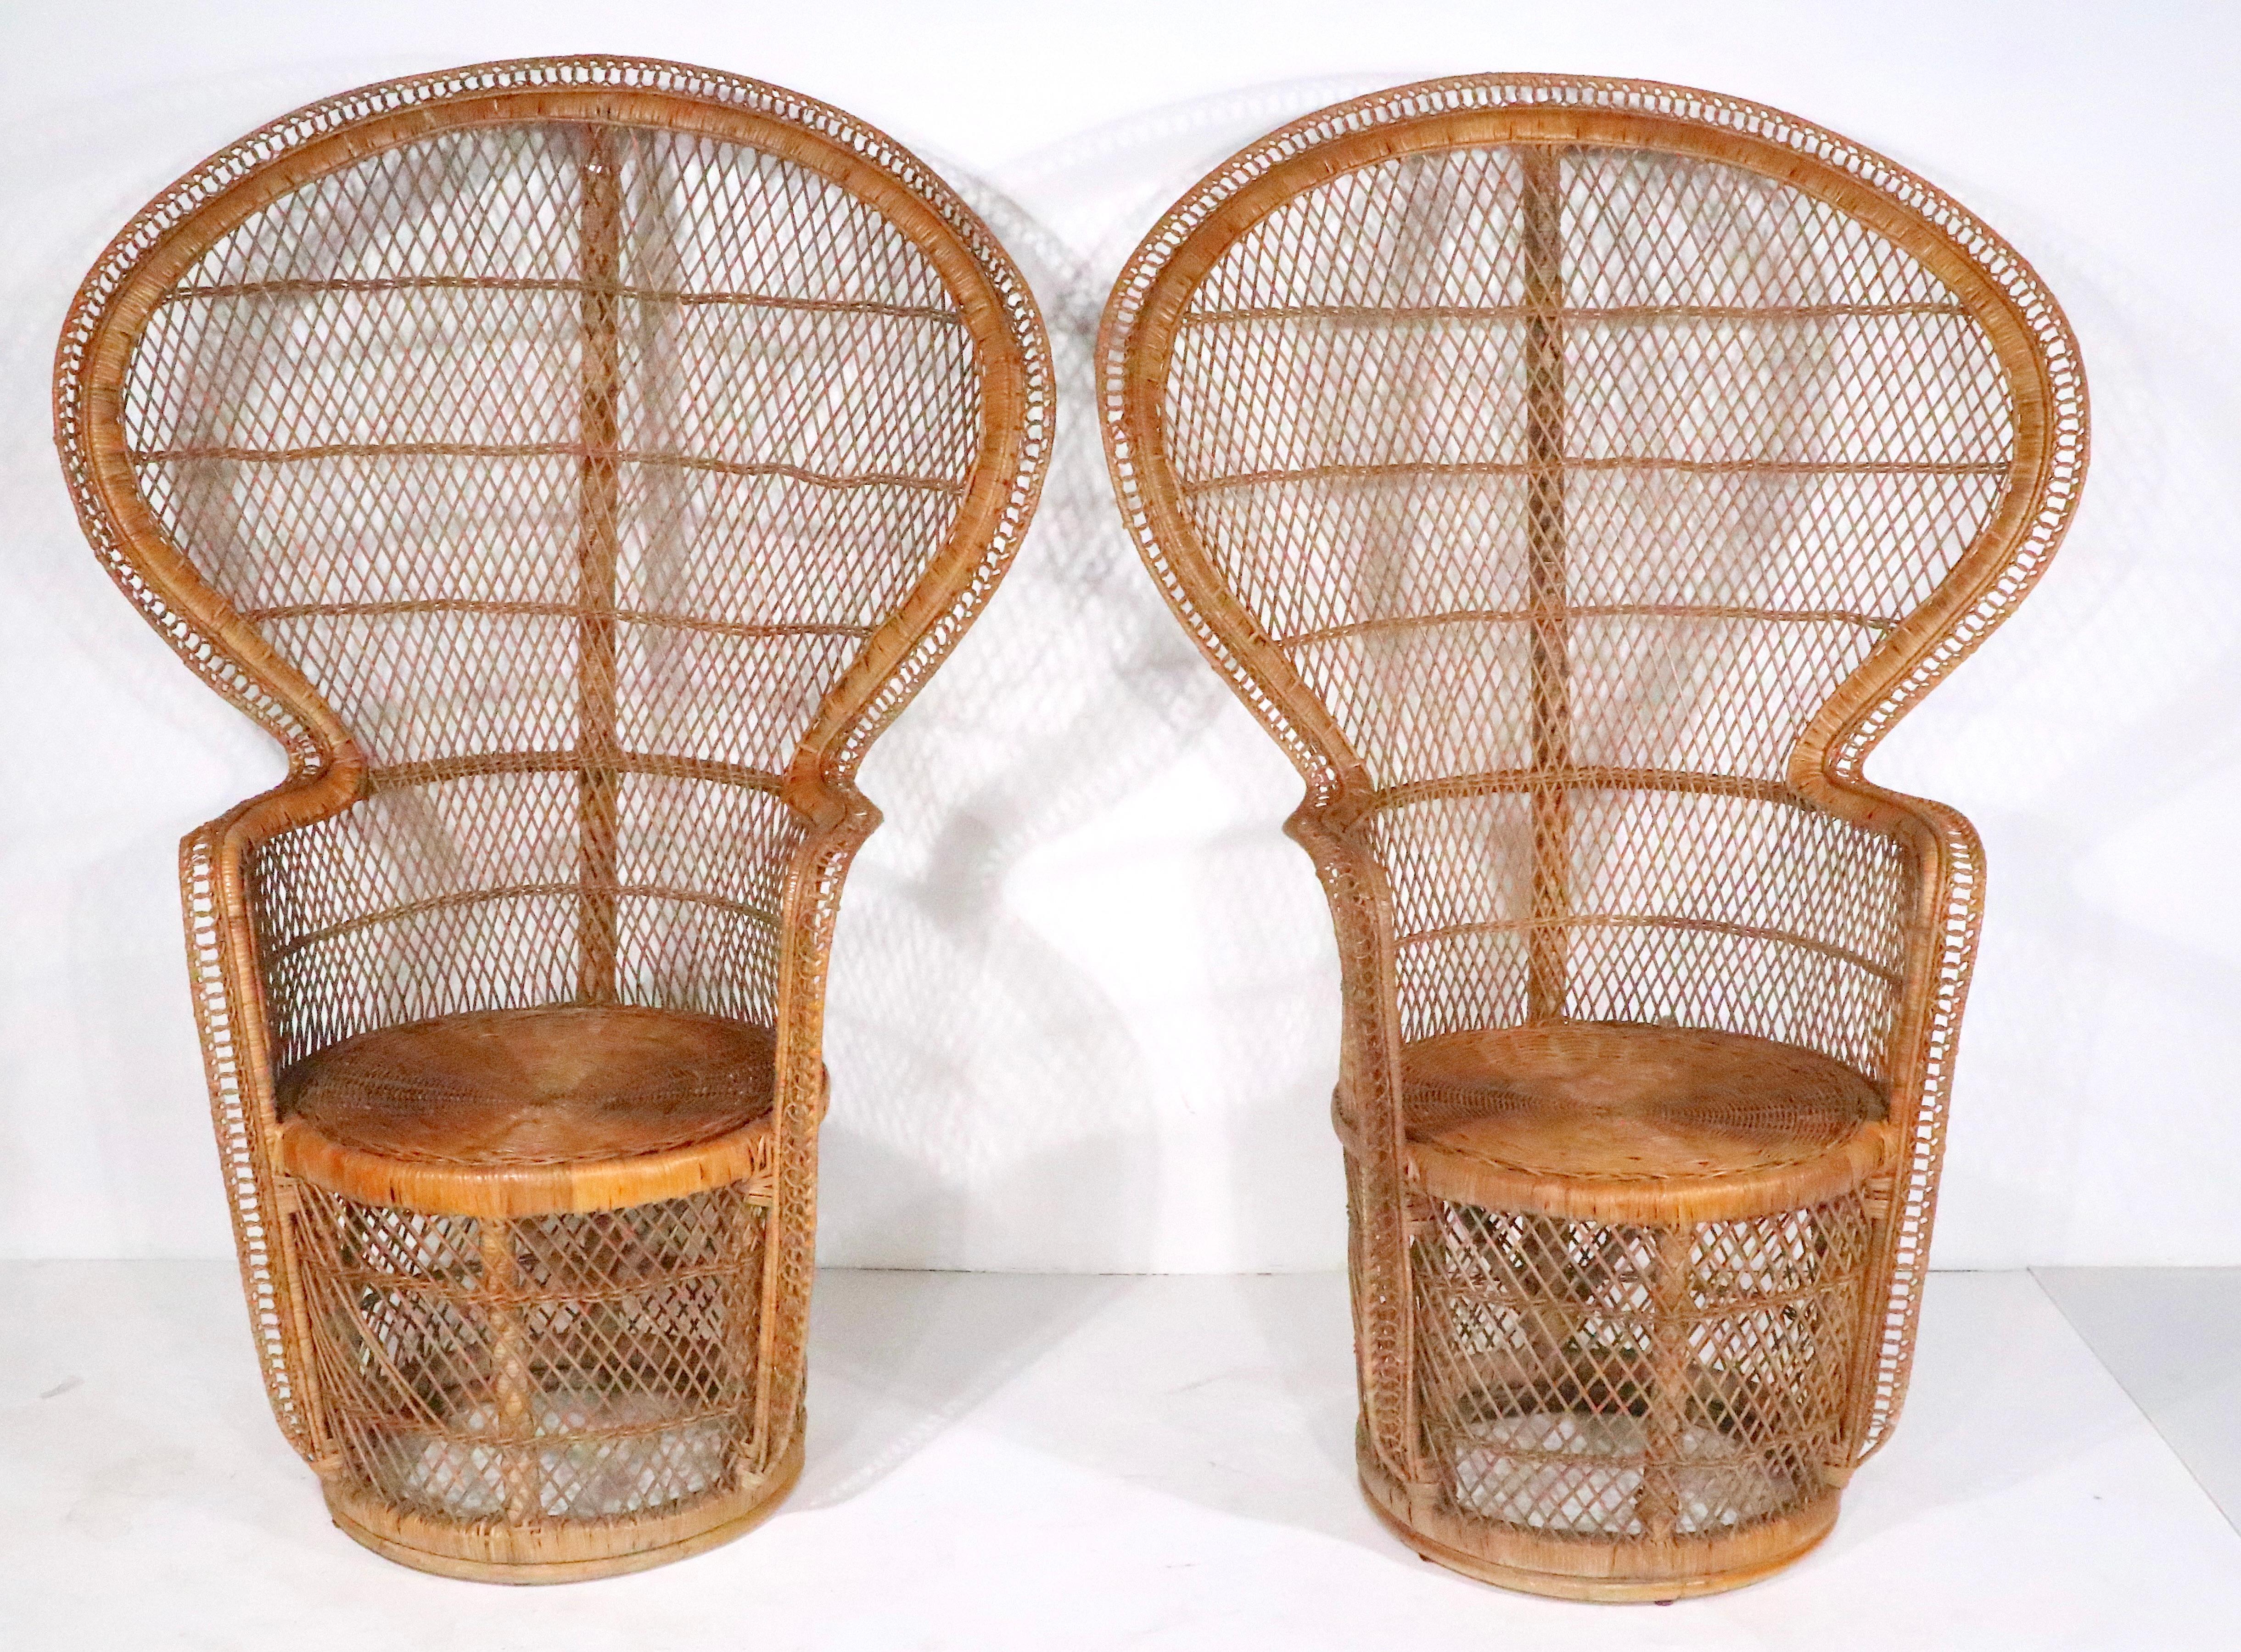 Pr. woven  wicker fan backs chairs, know as the Emanuelle chair. Hard to find  these chairs in good original, clean and ready to use  condition, very hard to find them in pairs. Matched set of vintage Emanuelle chairs, offered and priced as a pair.